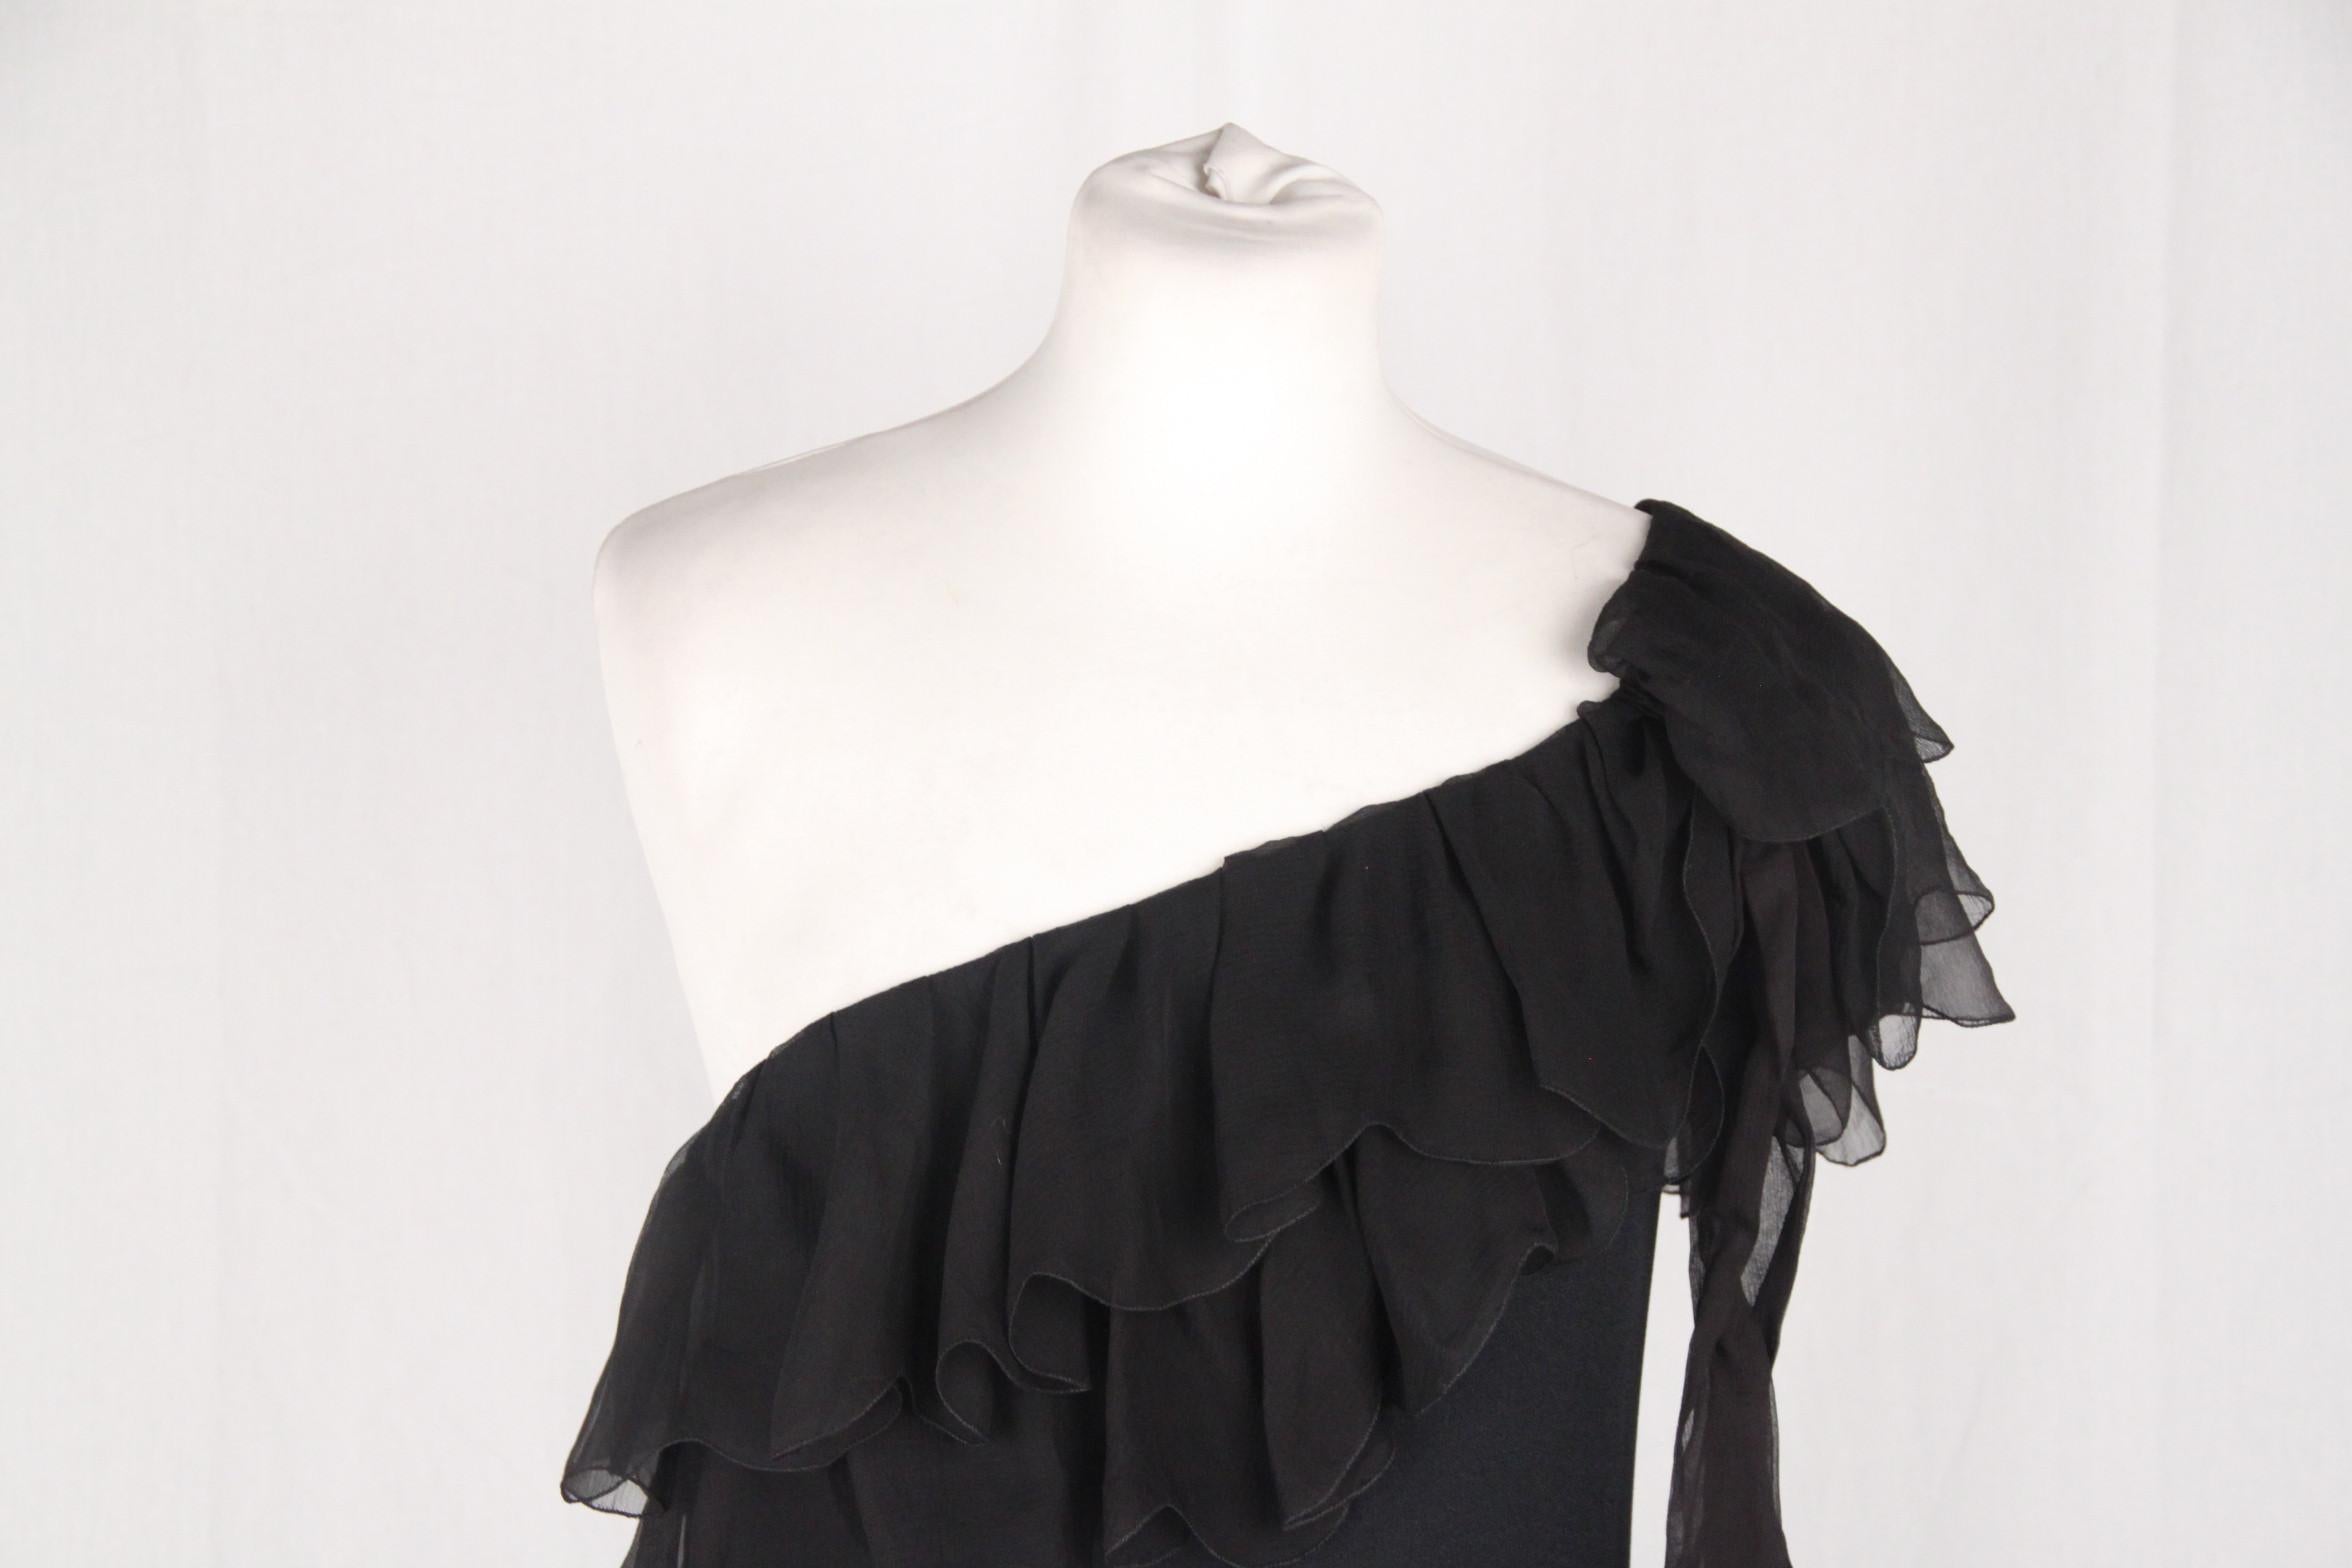 - CHRISTIAN DIOR - Made in Italy 
- One Shoulder Style 
- Chiffon ruffles on the neckline and on the hem
- Fabric / Material: 57% acetate - 43% Viscose 
- Color / Effect: Black 
- Main closure: Side zip closure 
- Size: 36 F, 8 GB, 40 IT, 34 D, 4